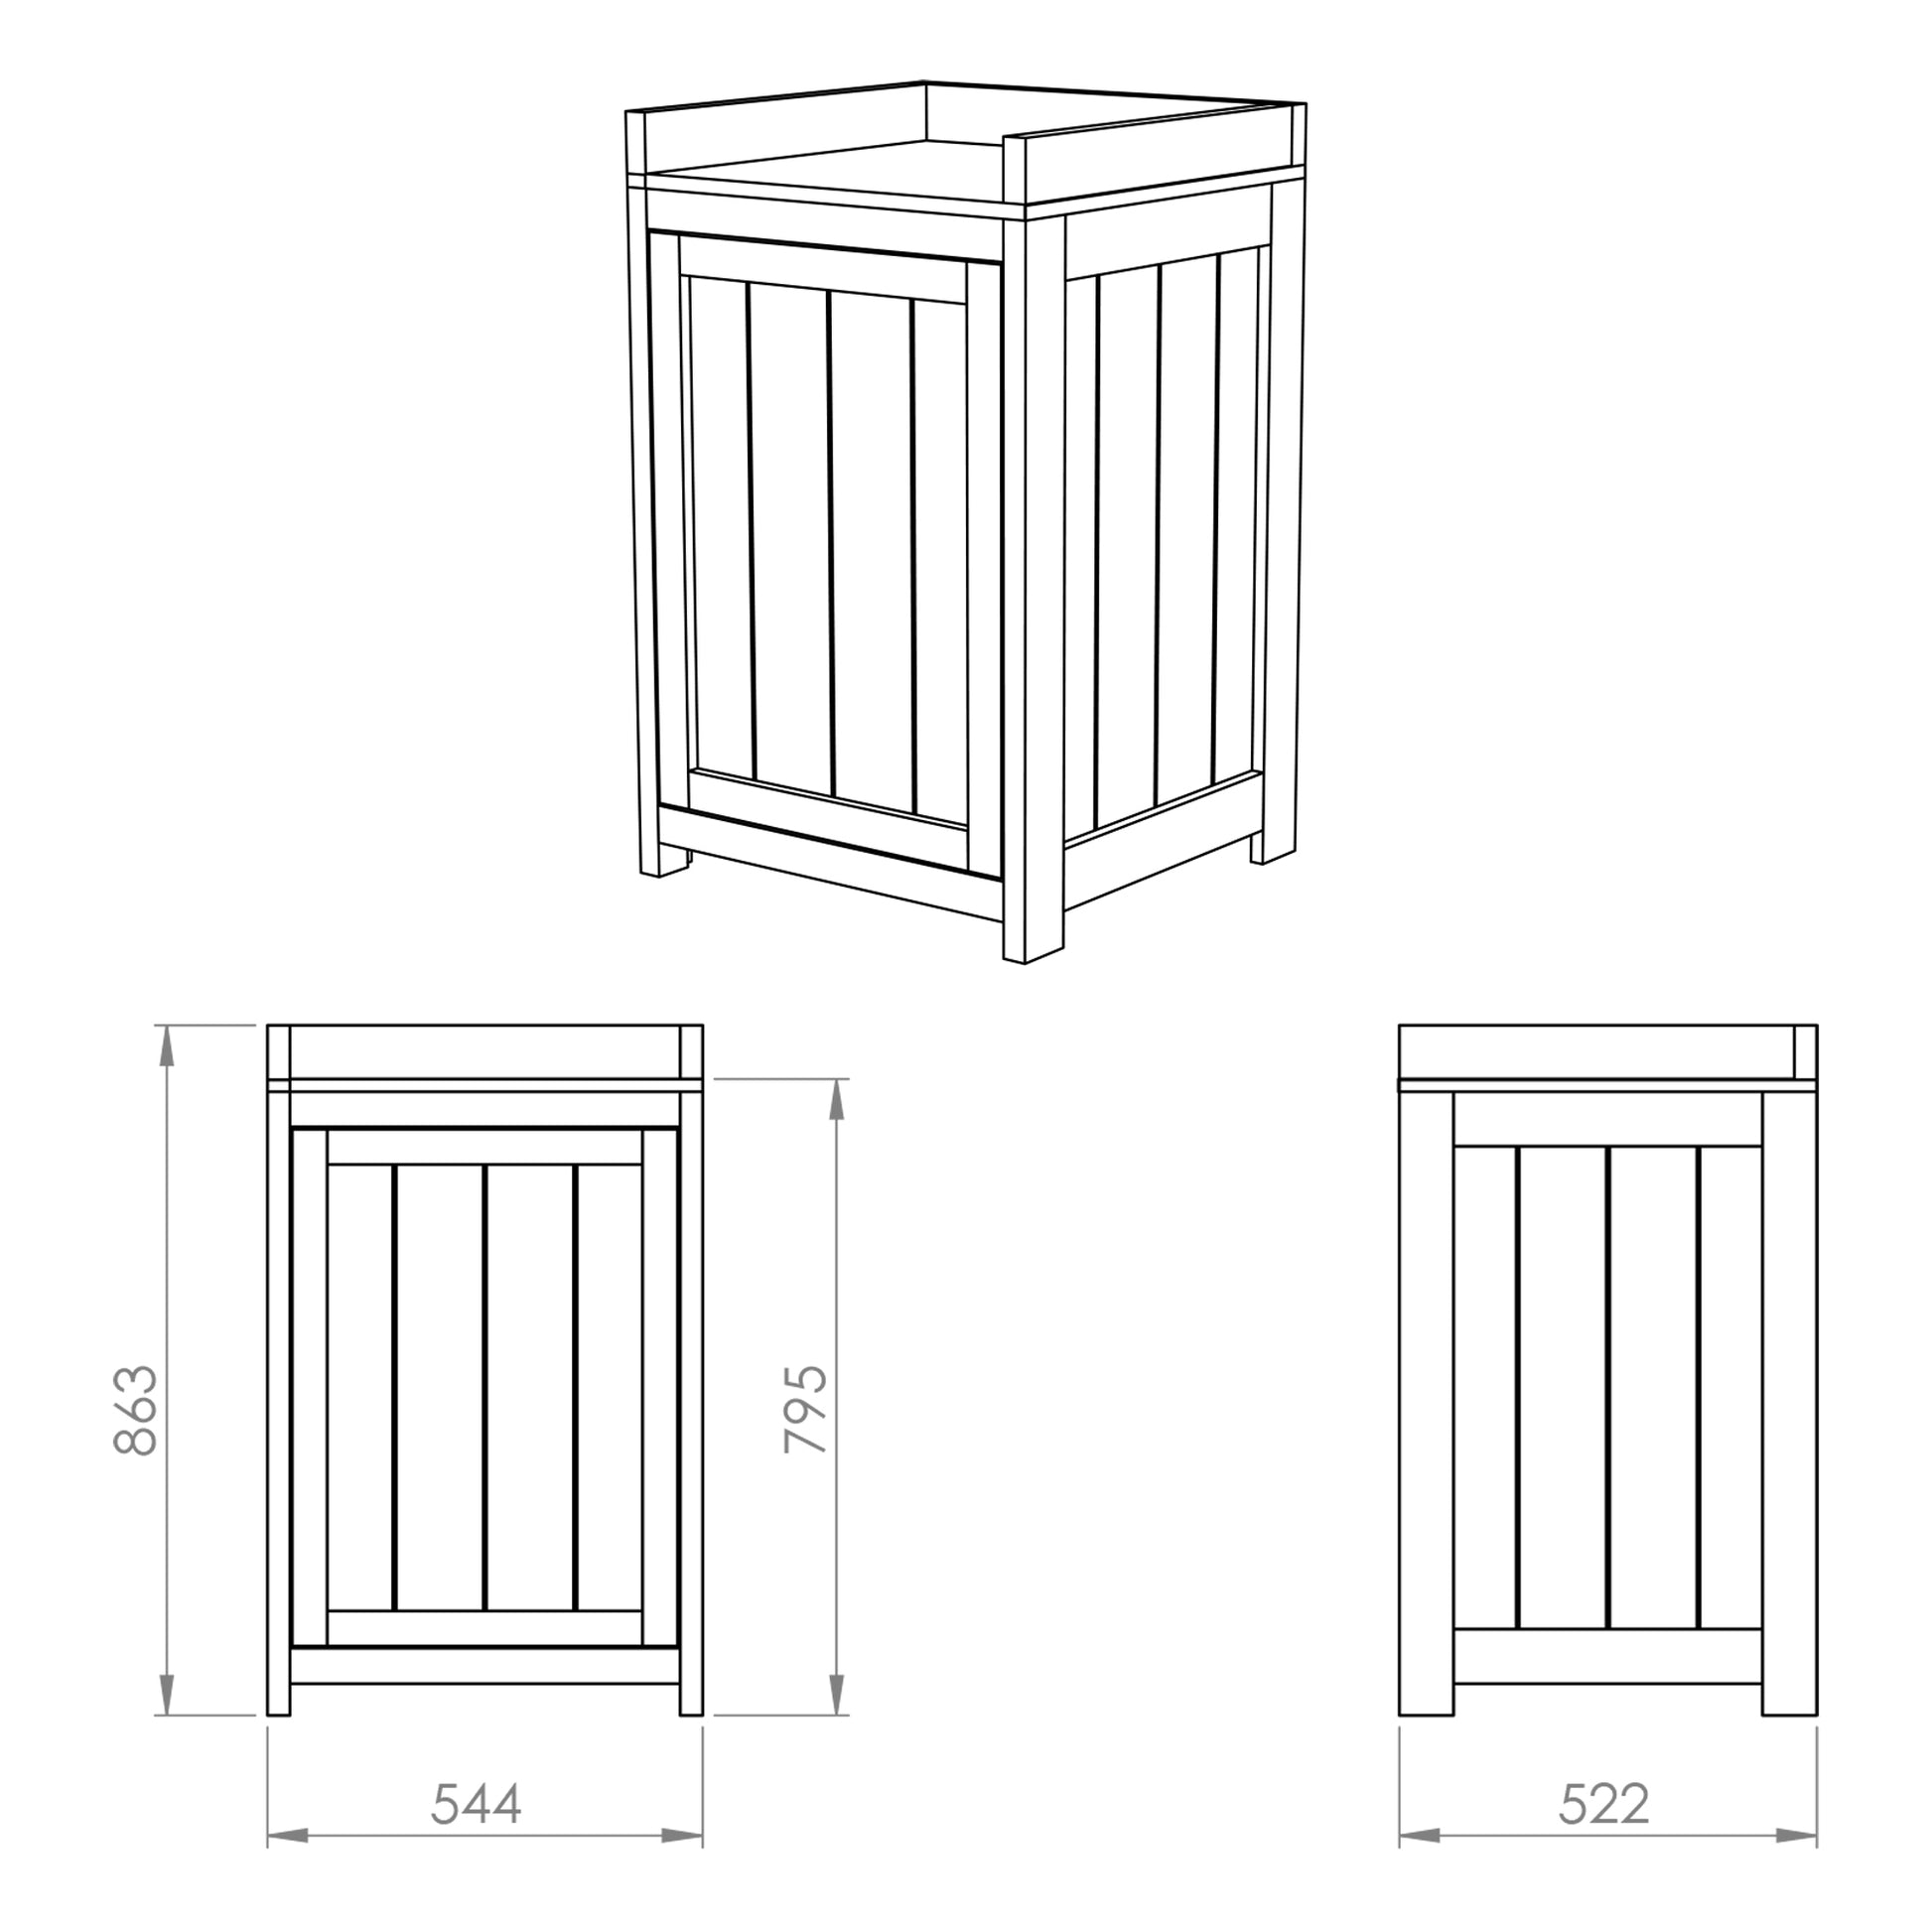 A specification image of a timber outdoor cabinet